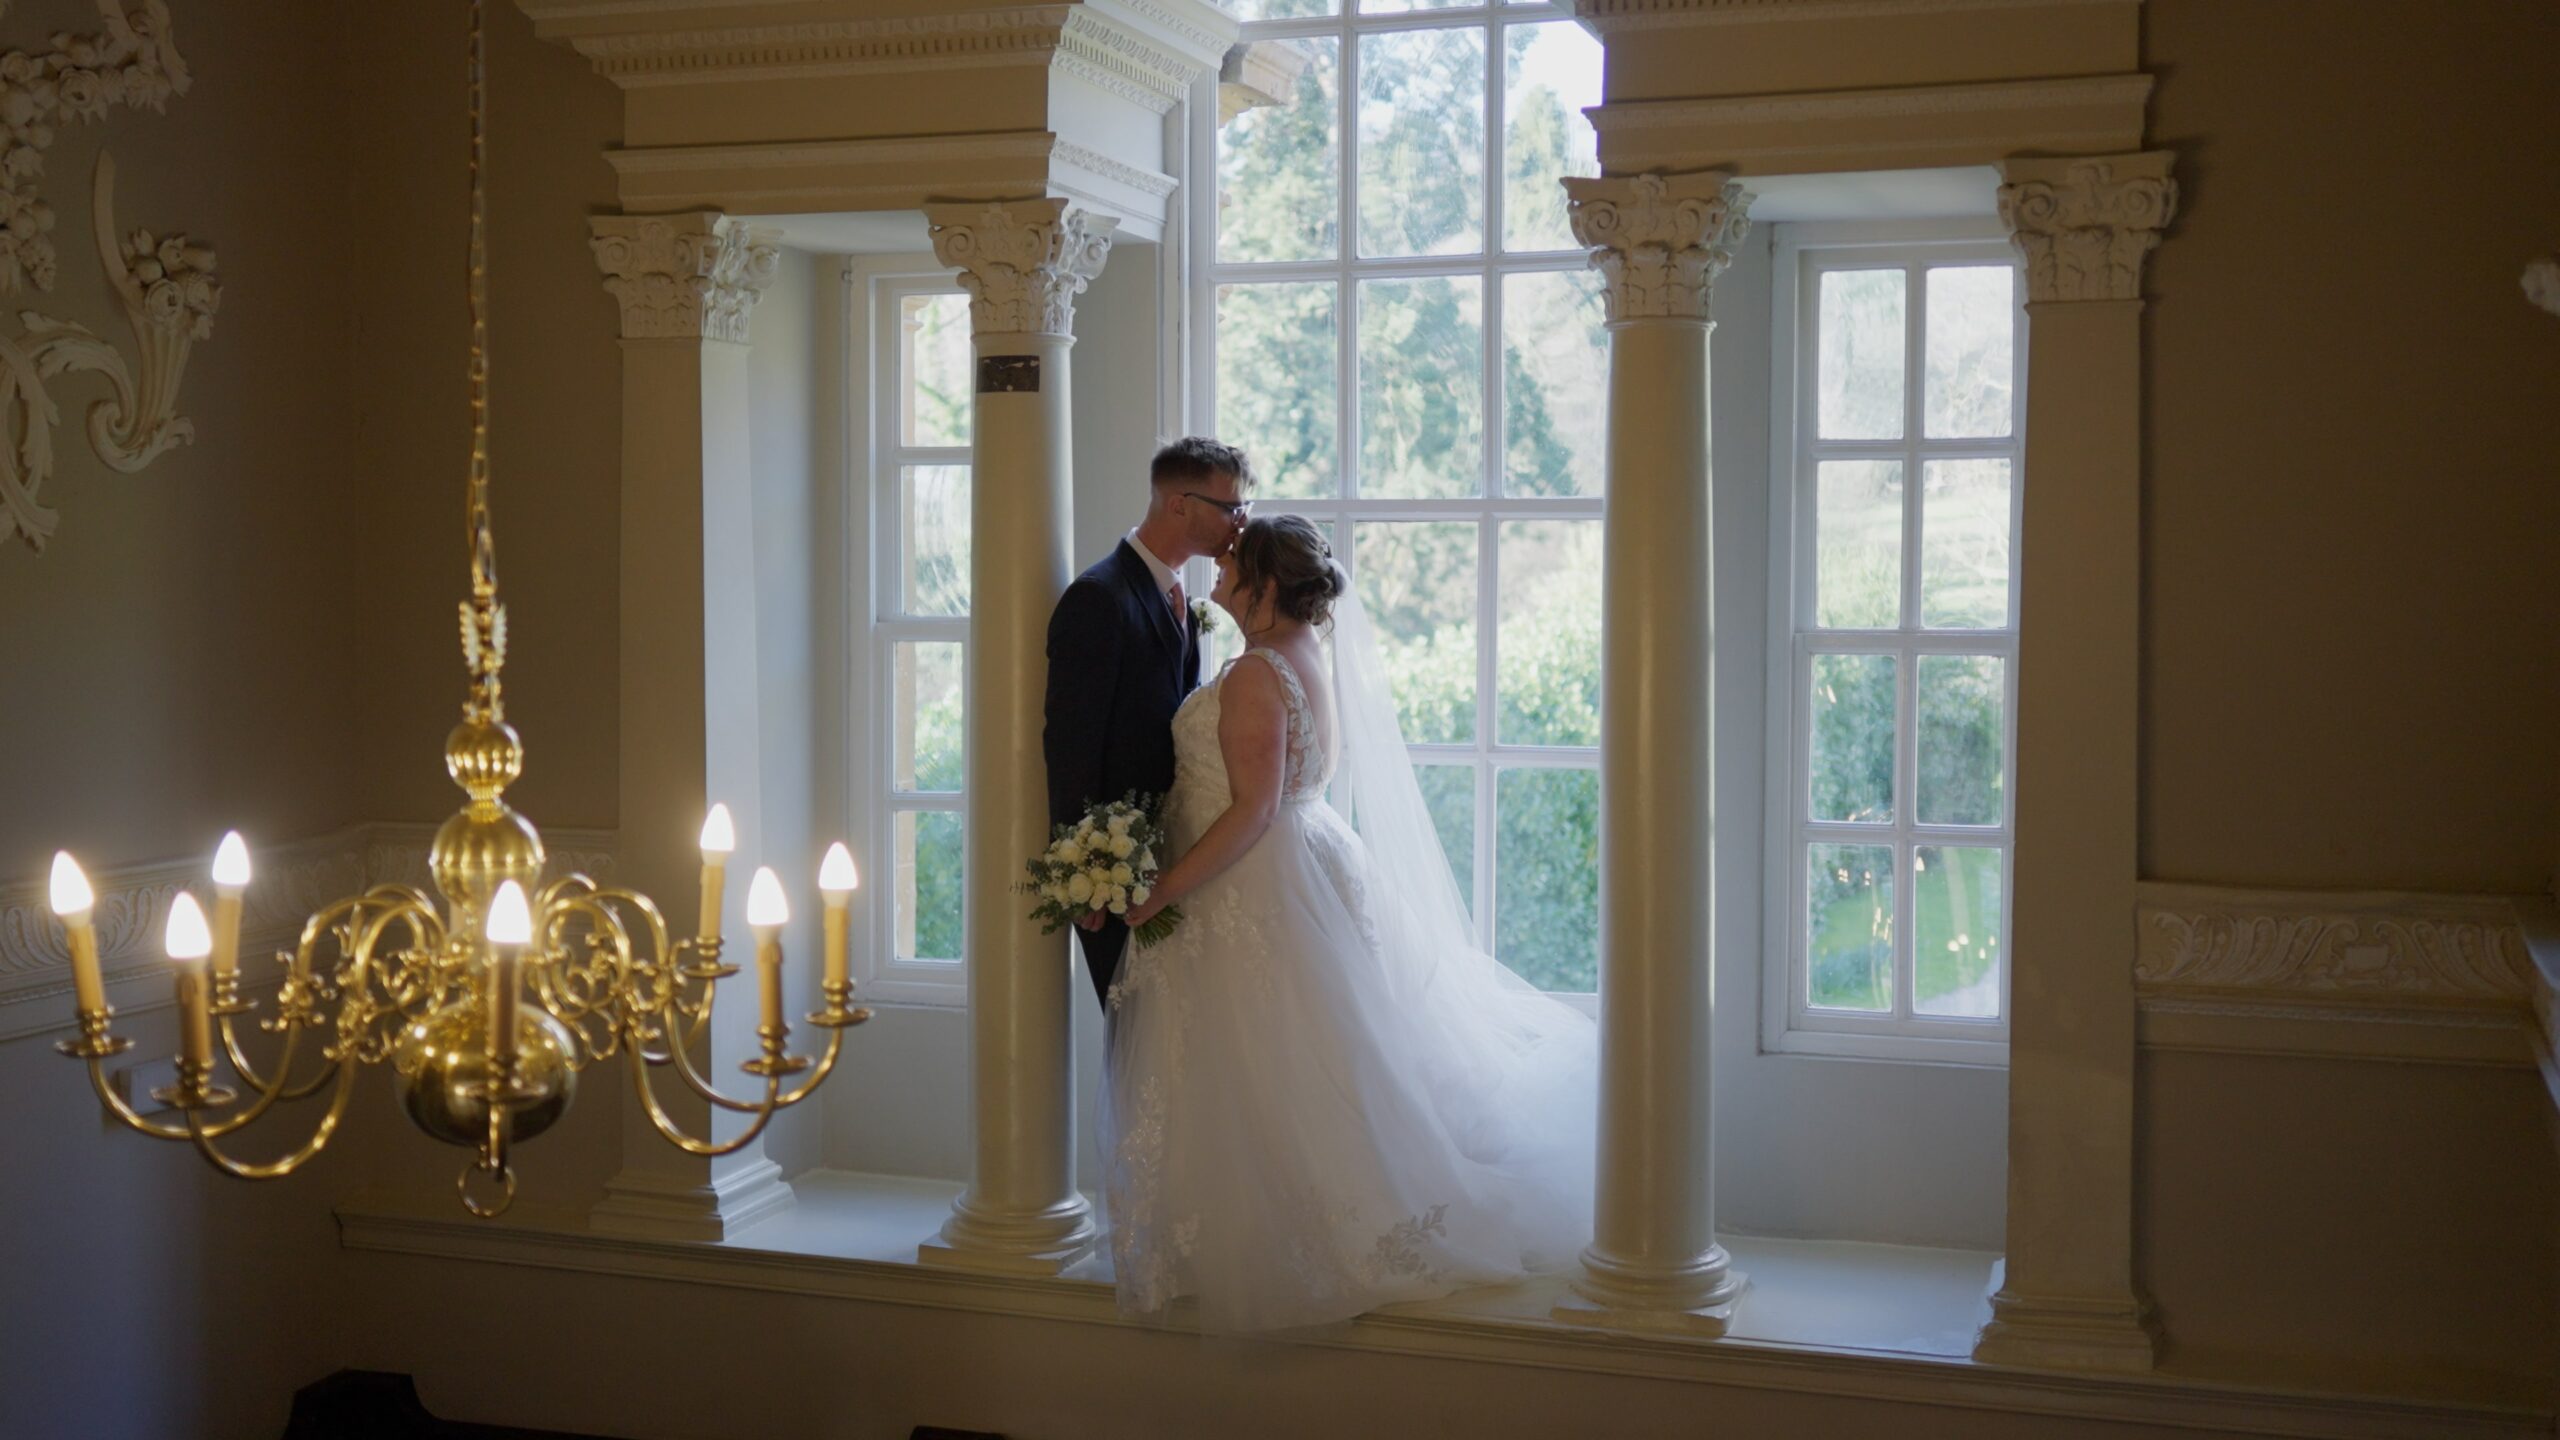 Kim & James in the grand window at the rear of crowcombe court.